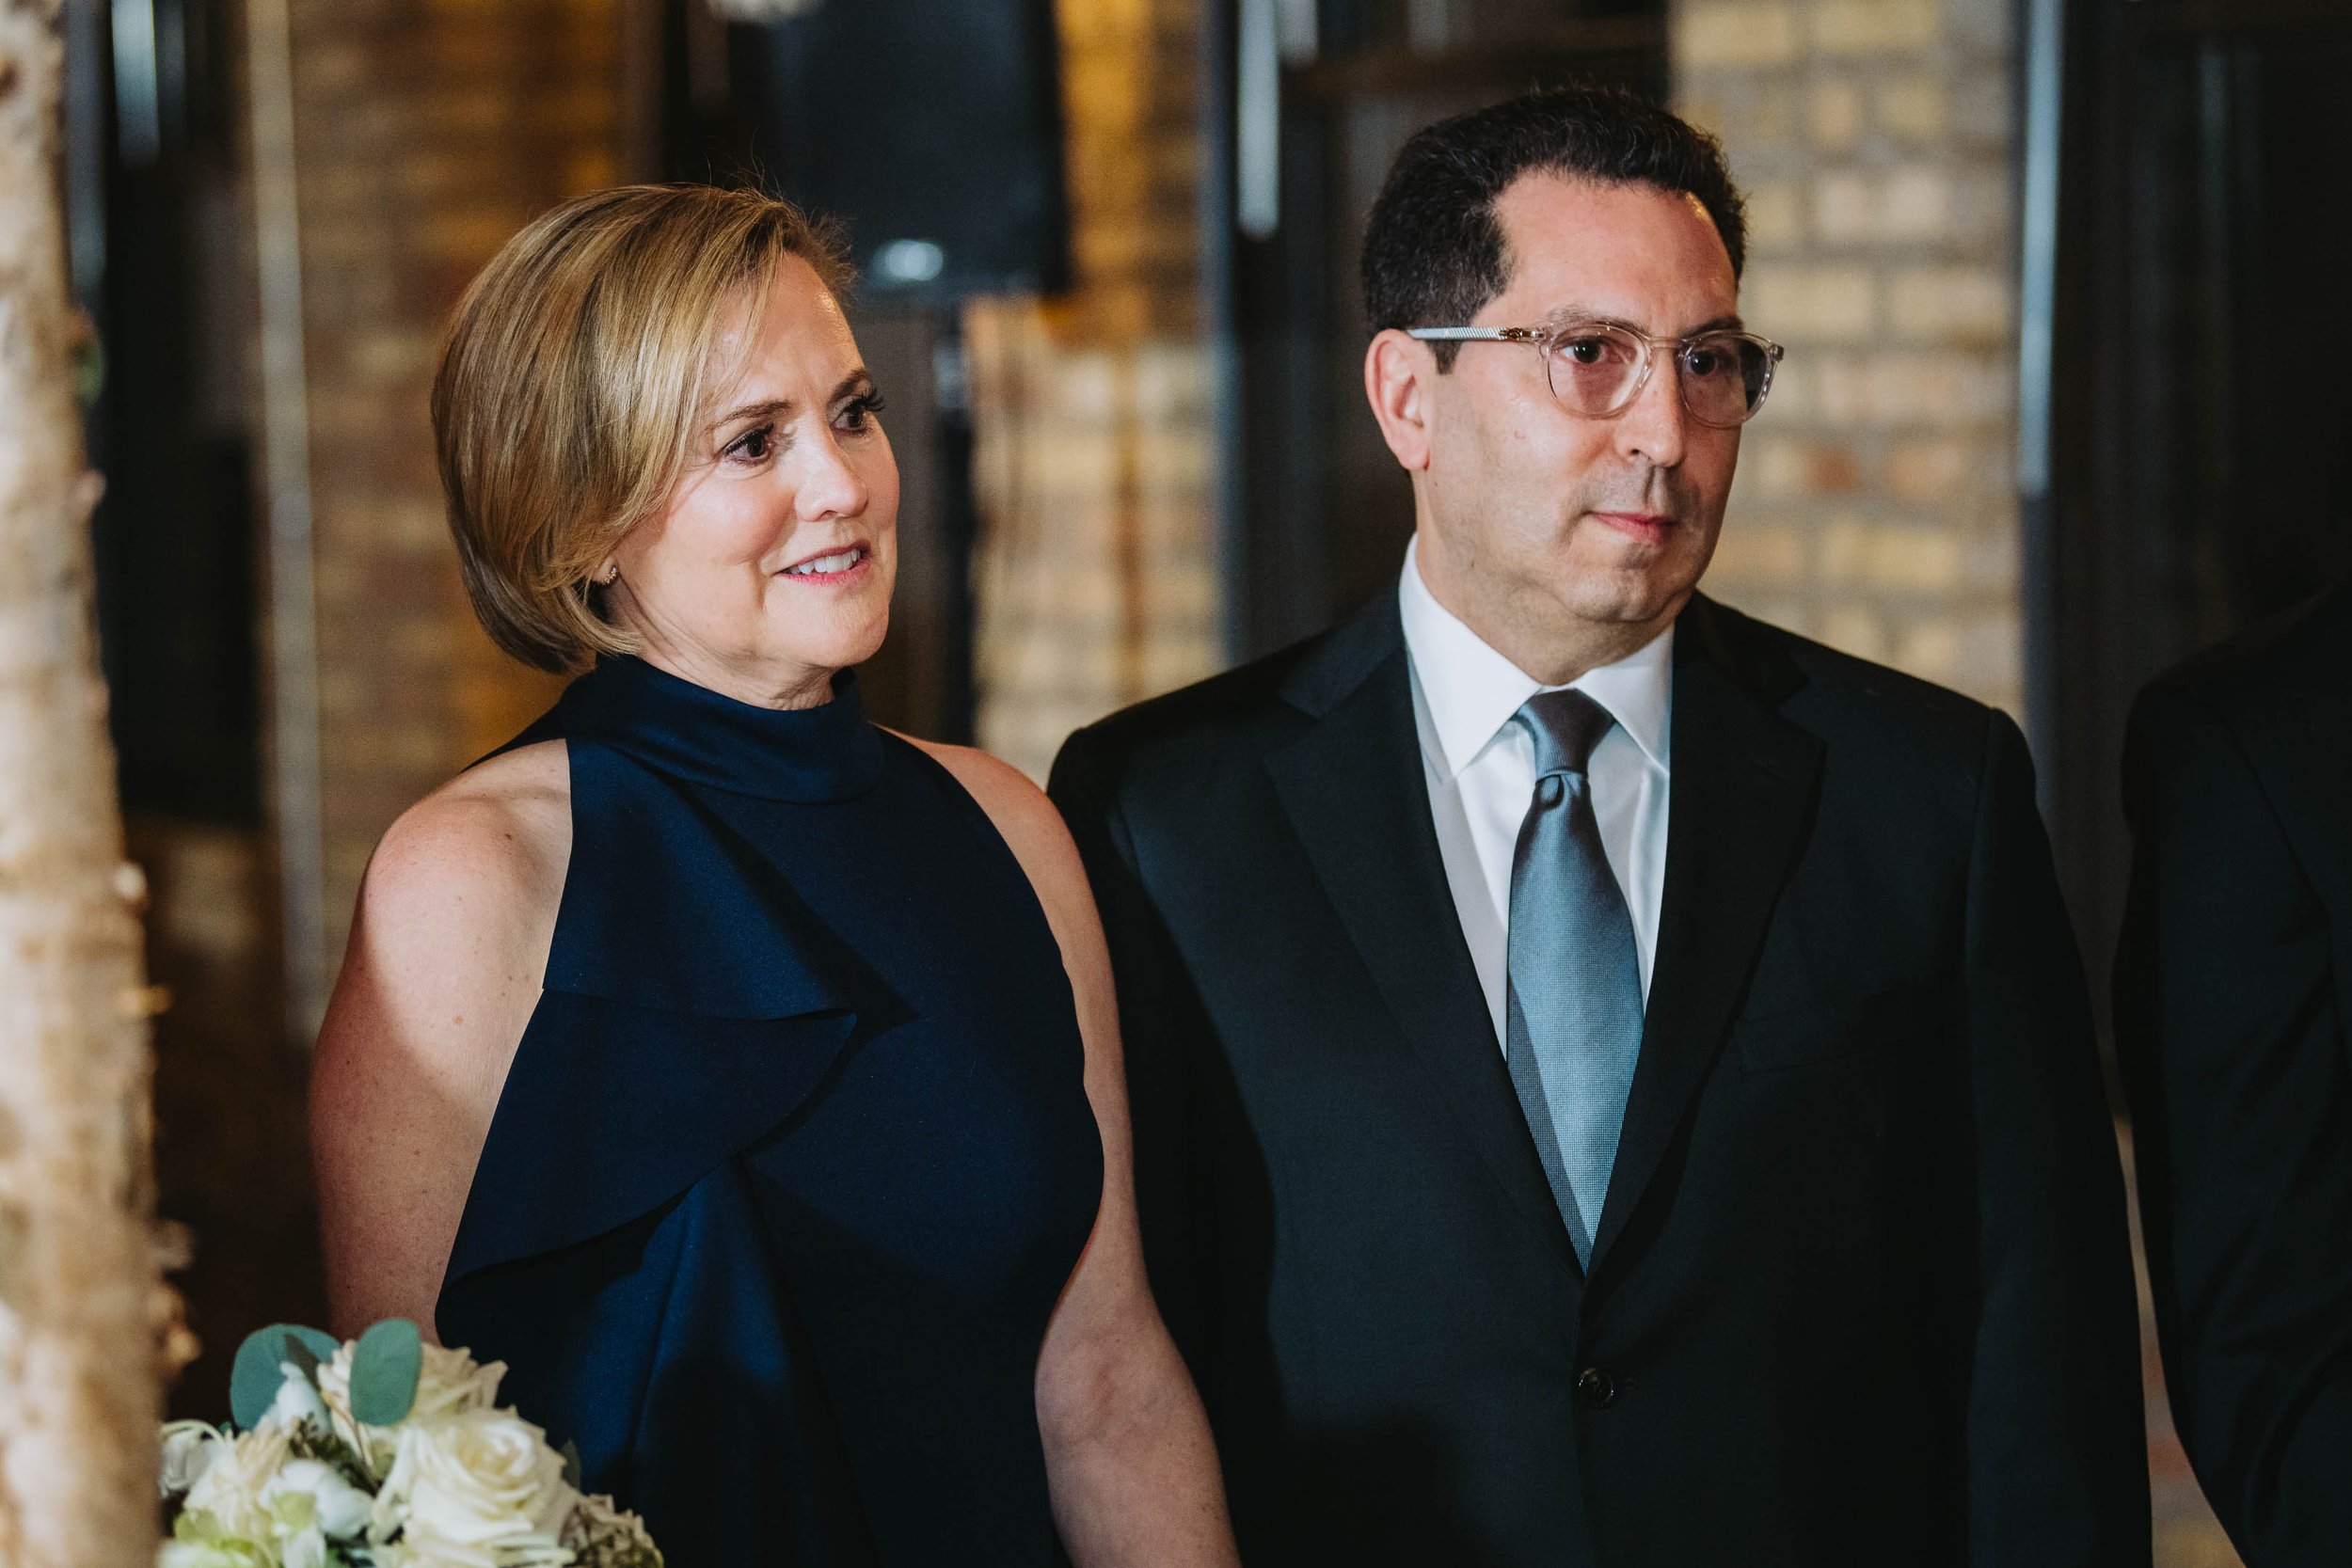 Top Wedding Photographers Near Me | Ravenswood Event Center | J. Brown Photography | parents of the bride during jewish ceremony